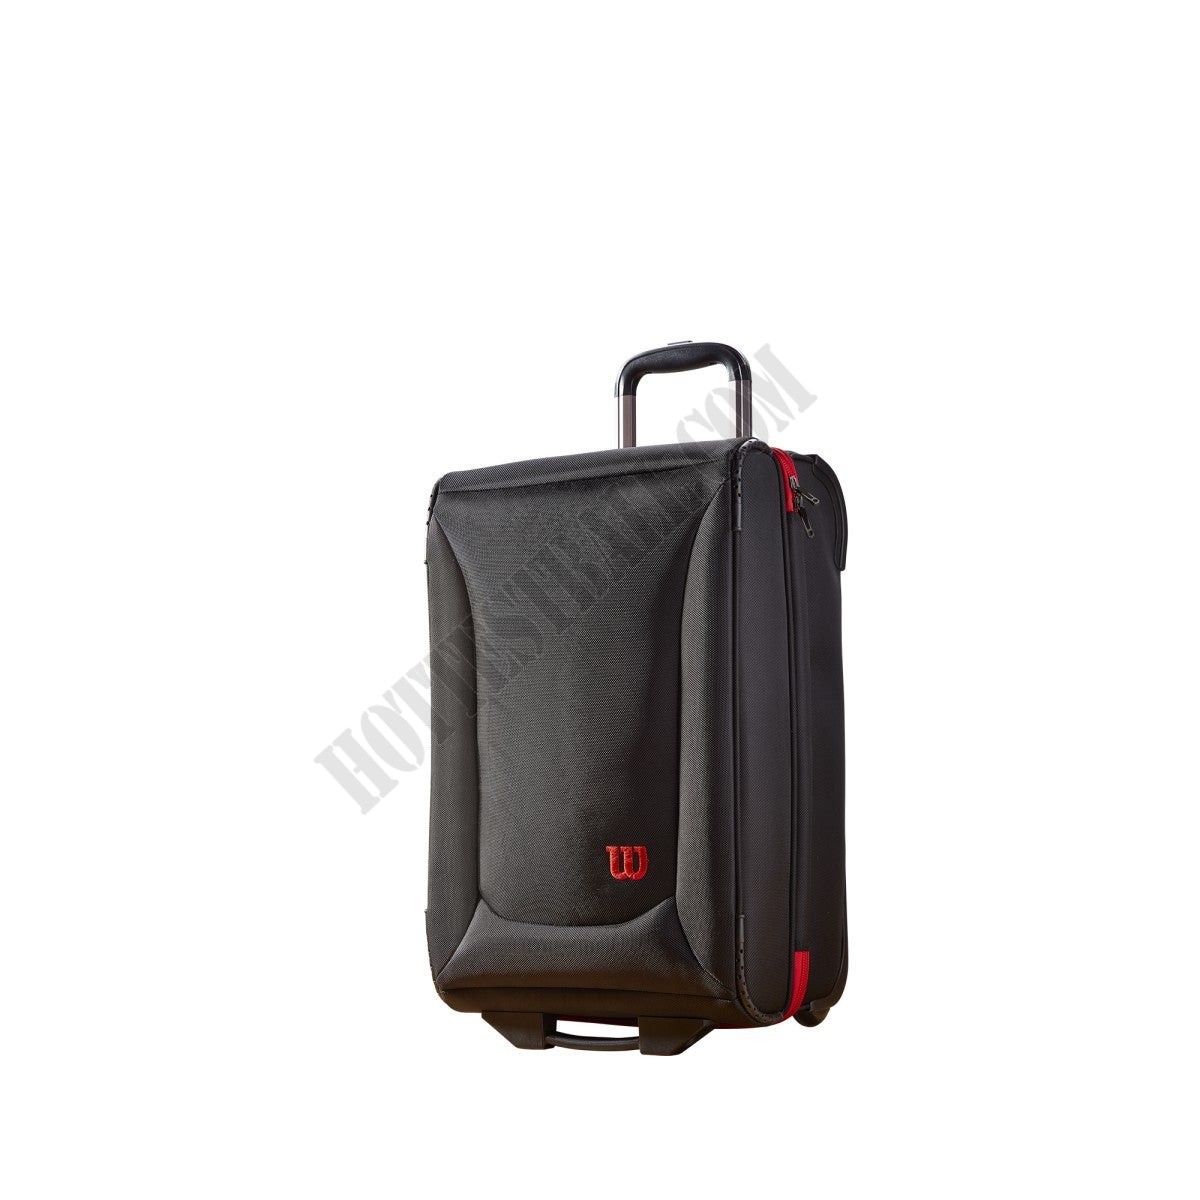 Domestic Carry-on SmBag - Wilson Discount Store - Domestic Carry-on SmBag - Wilson Discount Store